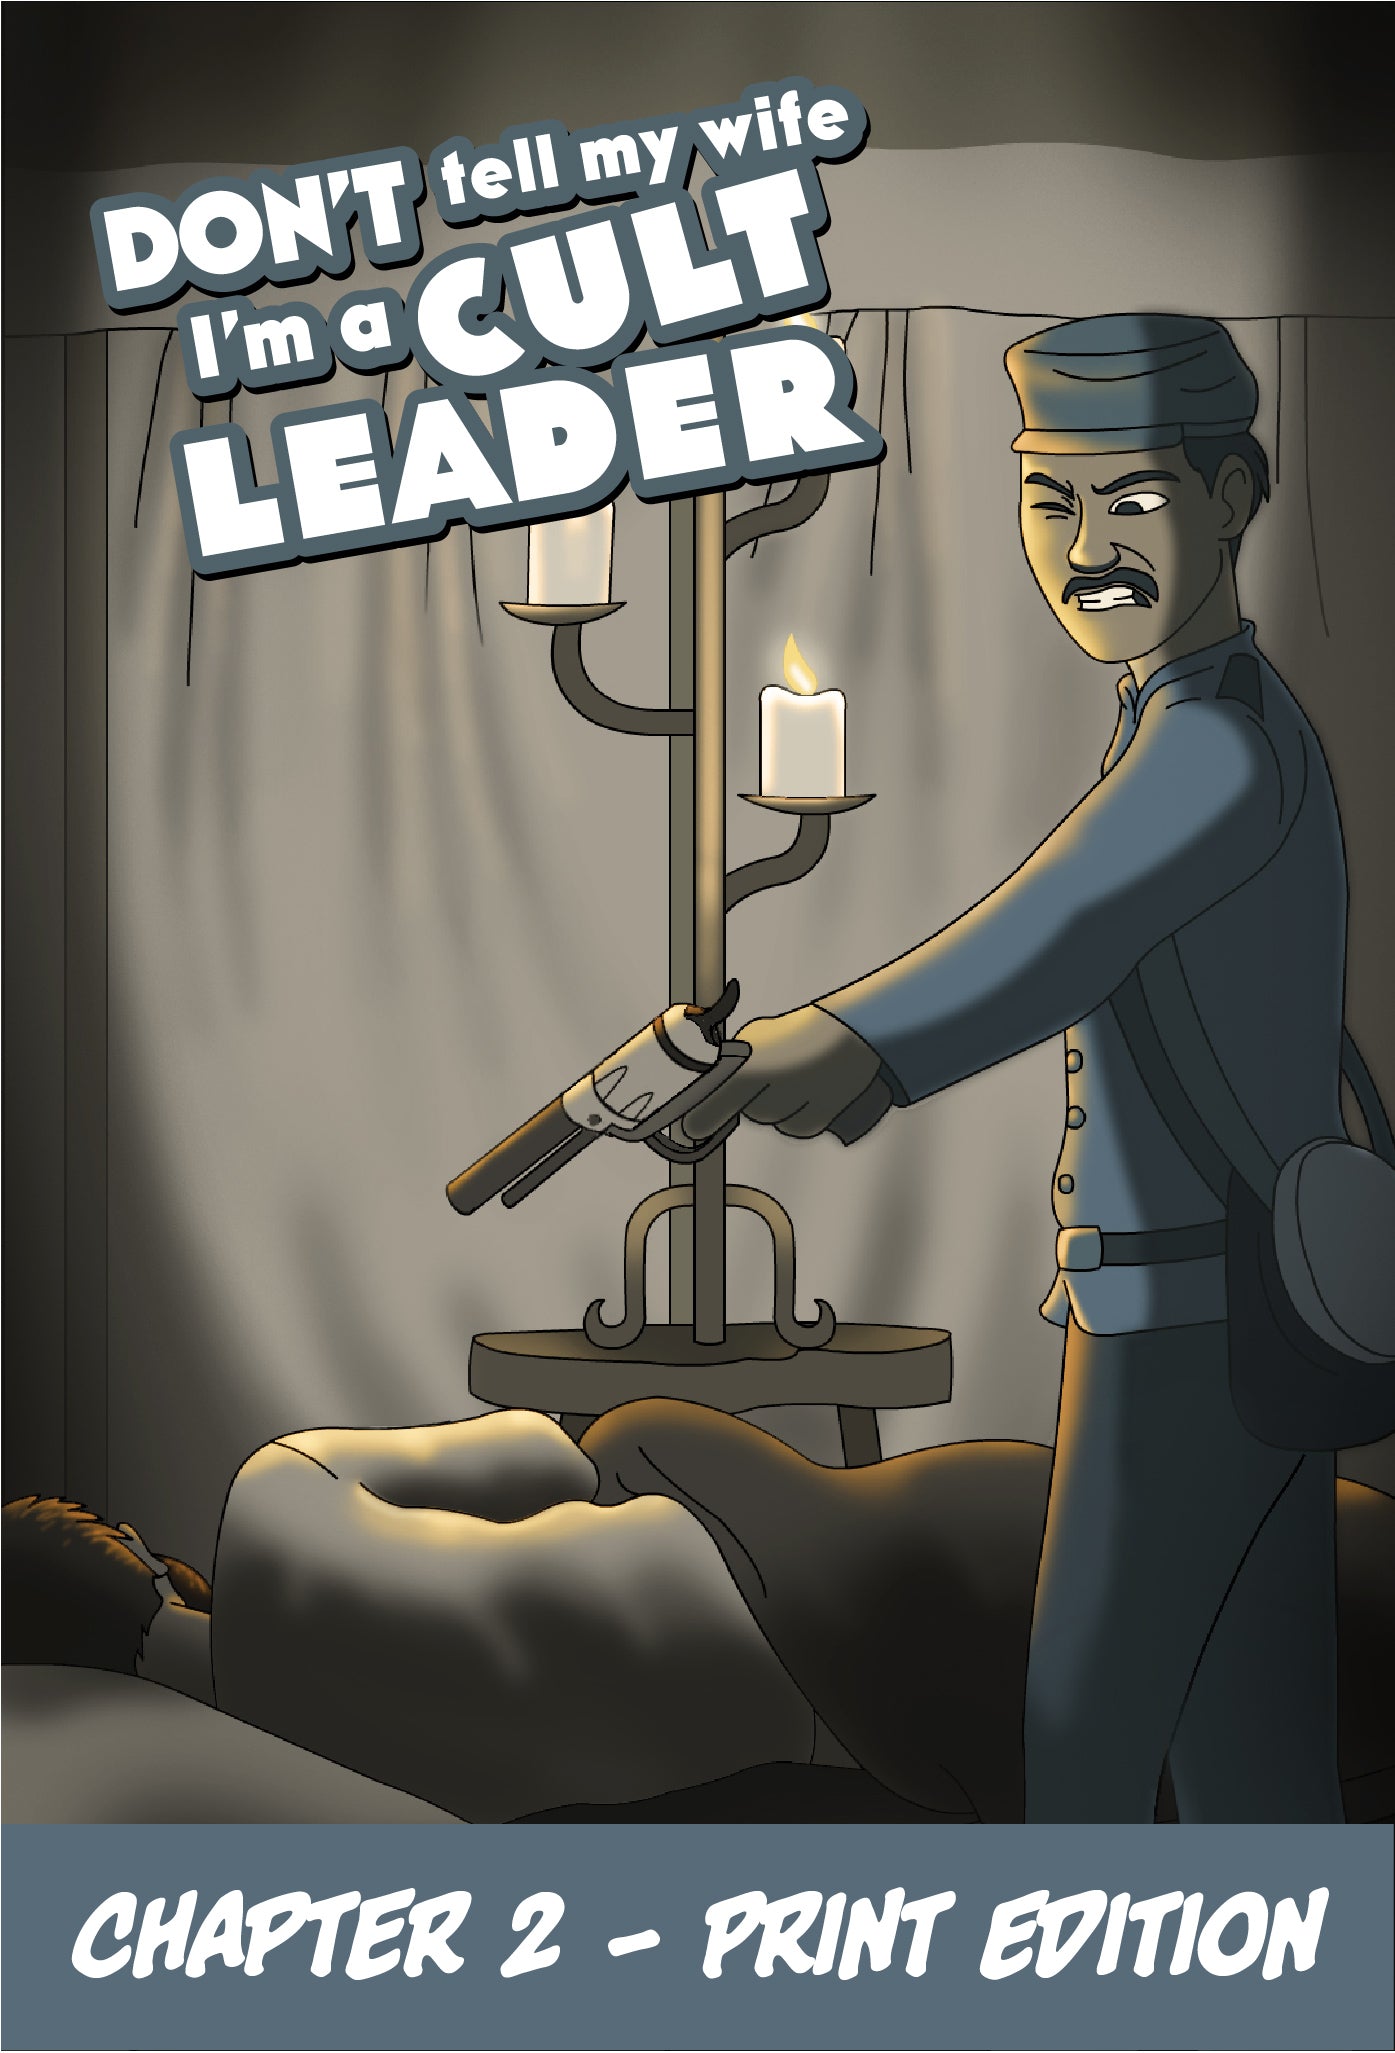 Cover of Chapter 2 of Don't Tell My Wife I'm a Cult Leader. We see a Civil War soldier about to put a bullet in a sleeping officer, from the print edition.